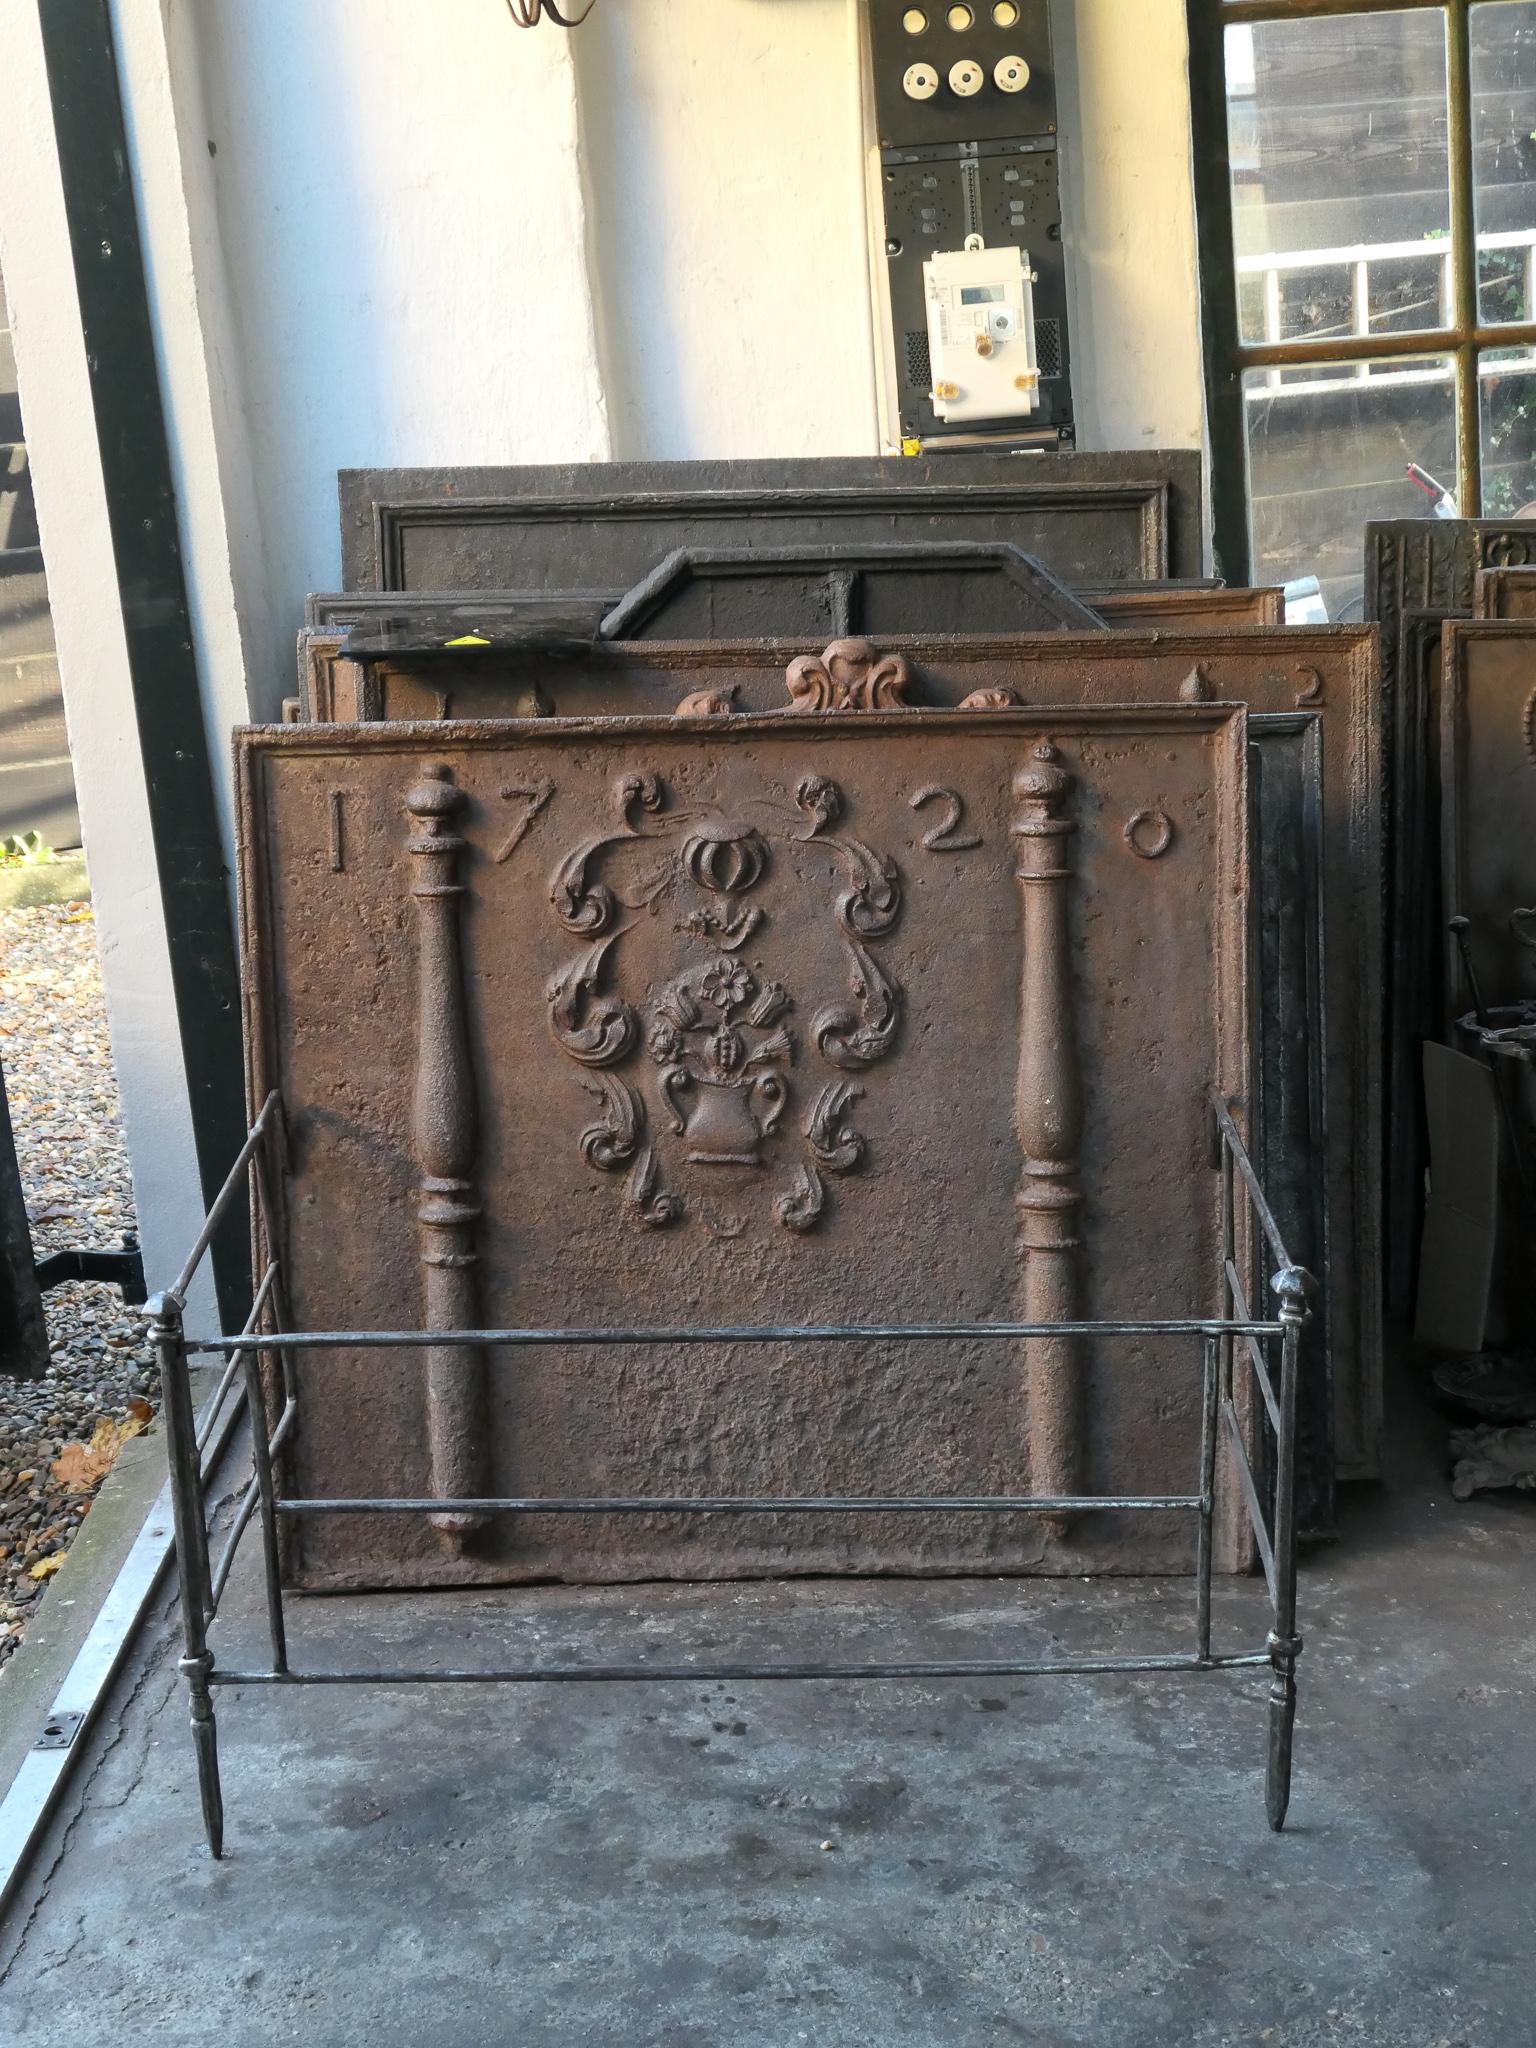 18th Century French Louis XV period nursery fireguard - fireplace guard made of wrought iron. It may be used to protect children from the fire.

The fire guard is in a good condition and is fully functional.

All our products that weigh 66 kg / 146